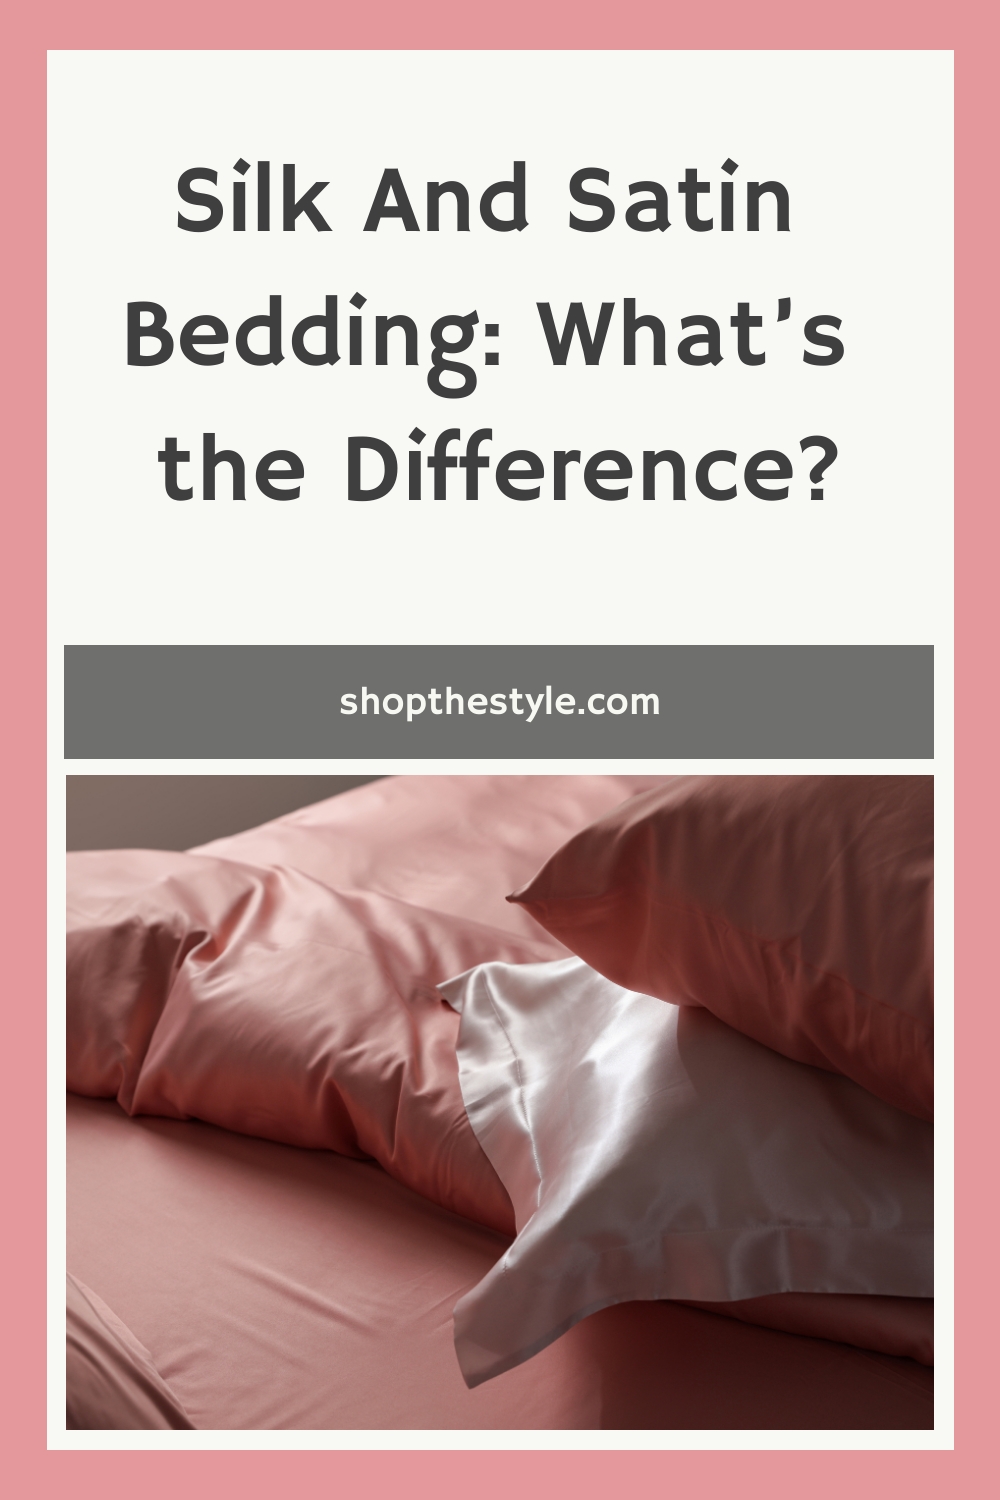 Silk And Satin Bedding: What’s the Difference?